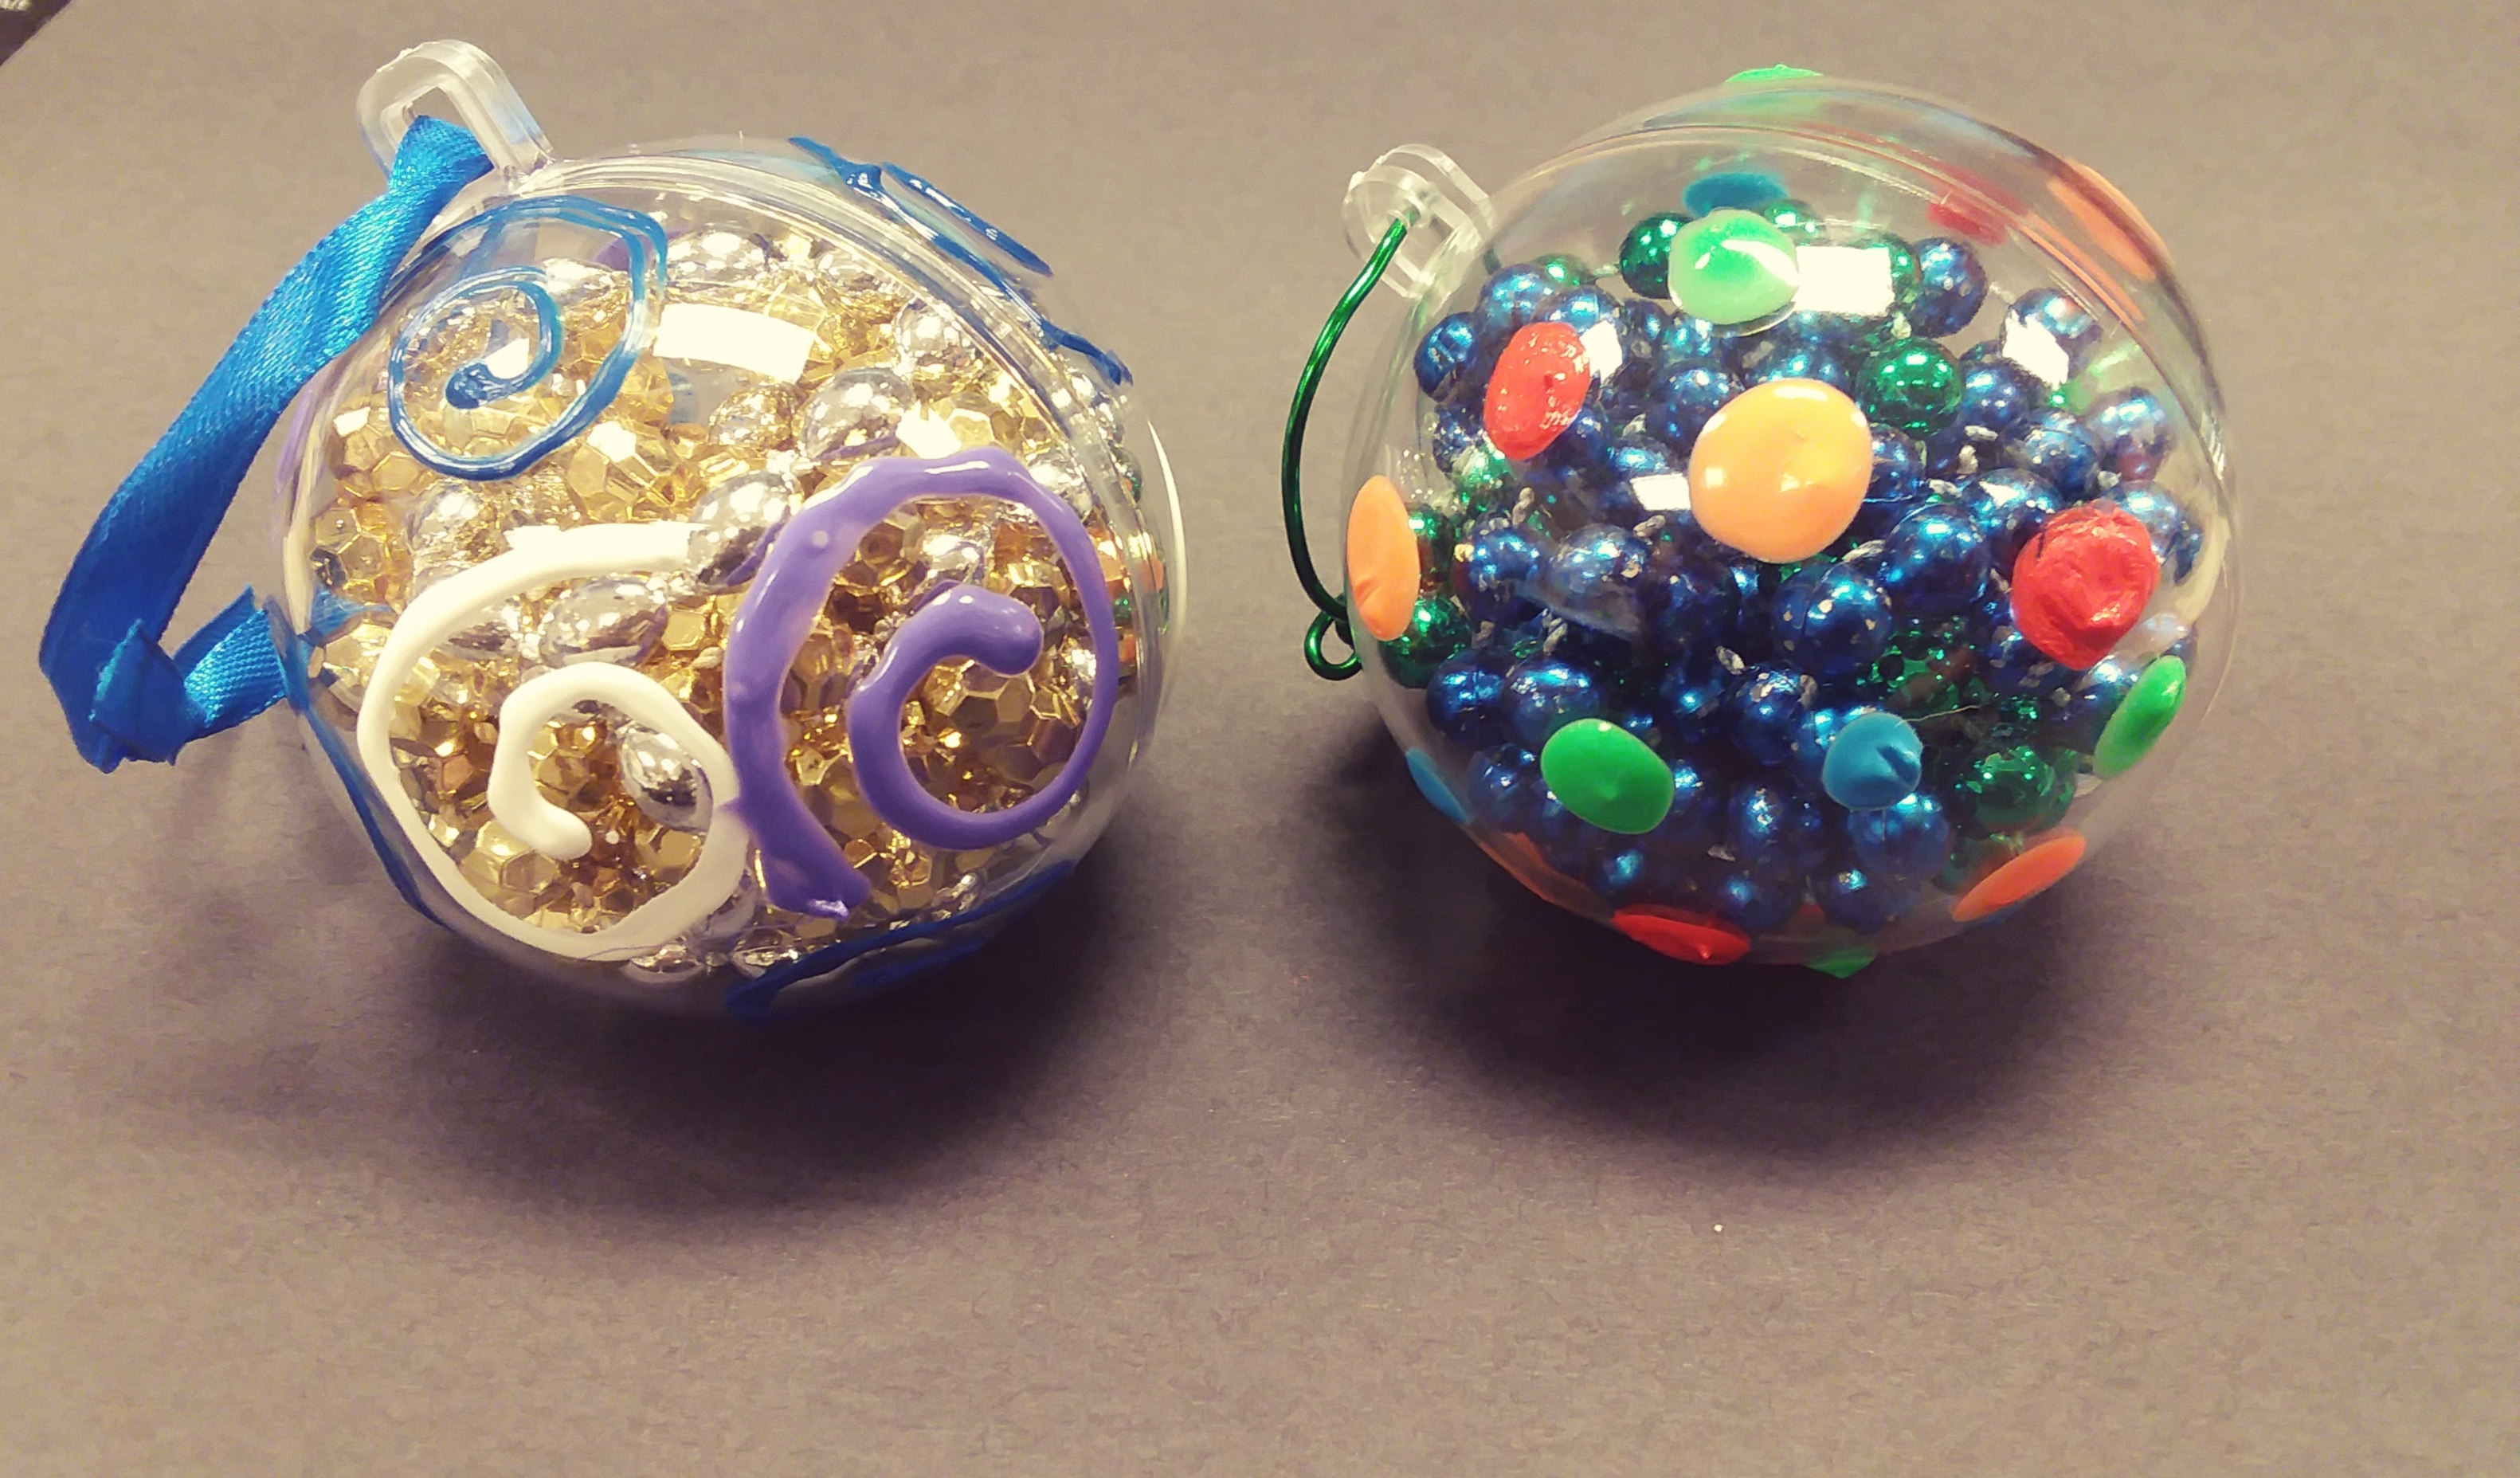 clear plastic ornaments painted with puffy paint and filled with shiny beads